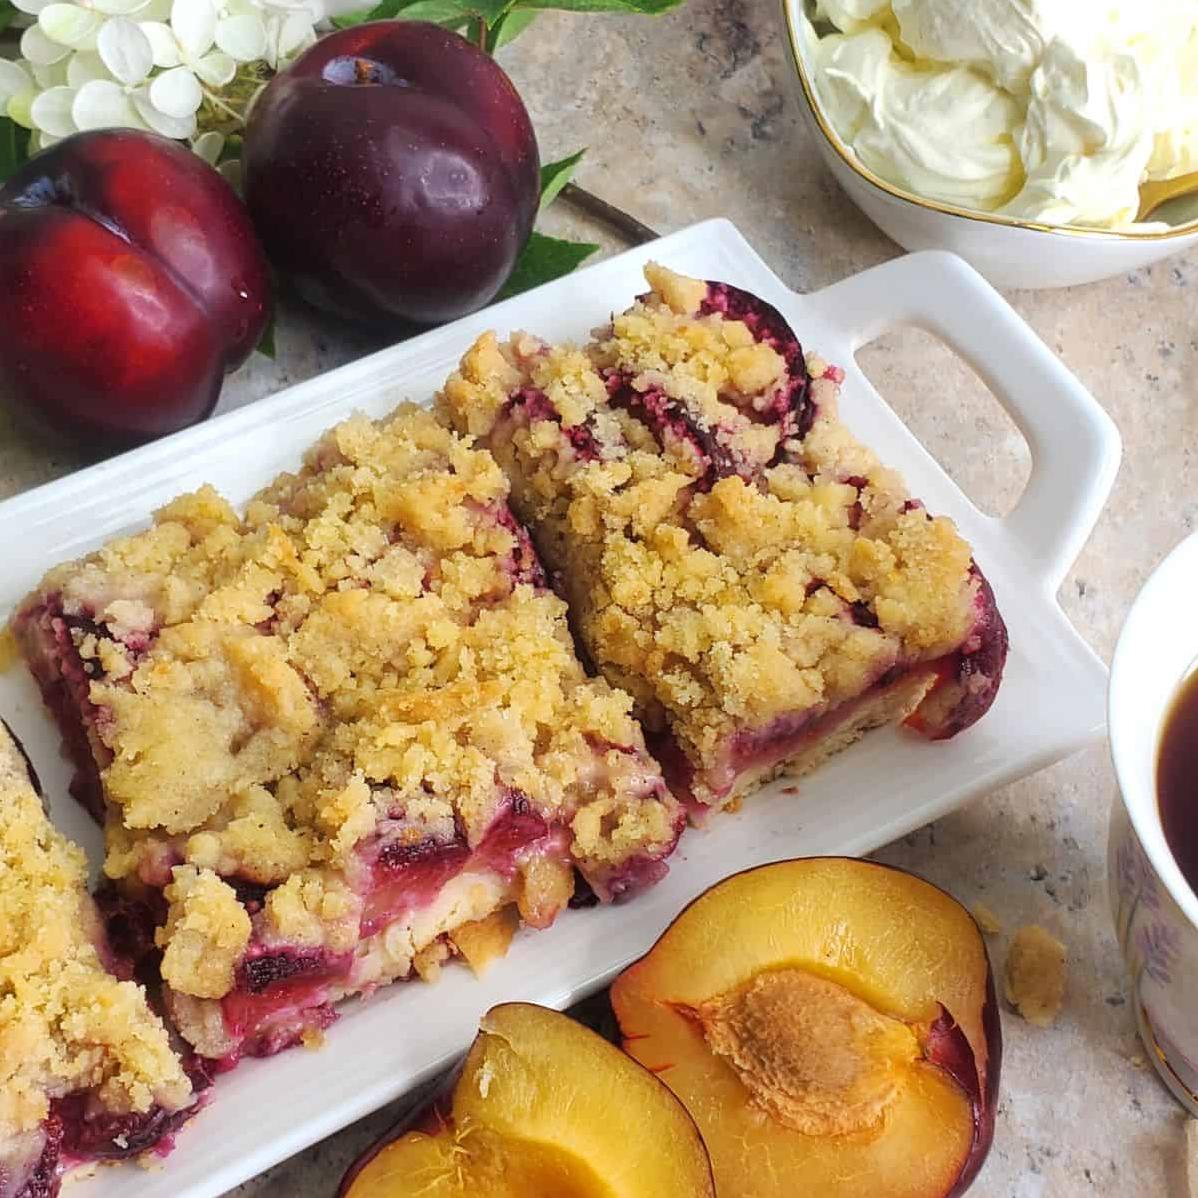  Explore the perfect balance of flavors in every bite of this German Plum Coffee Cake